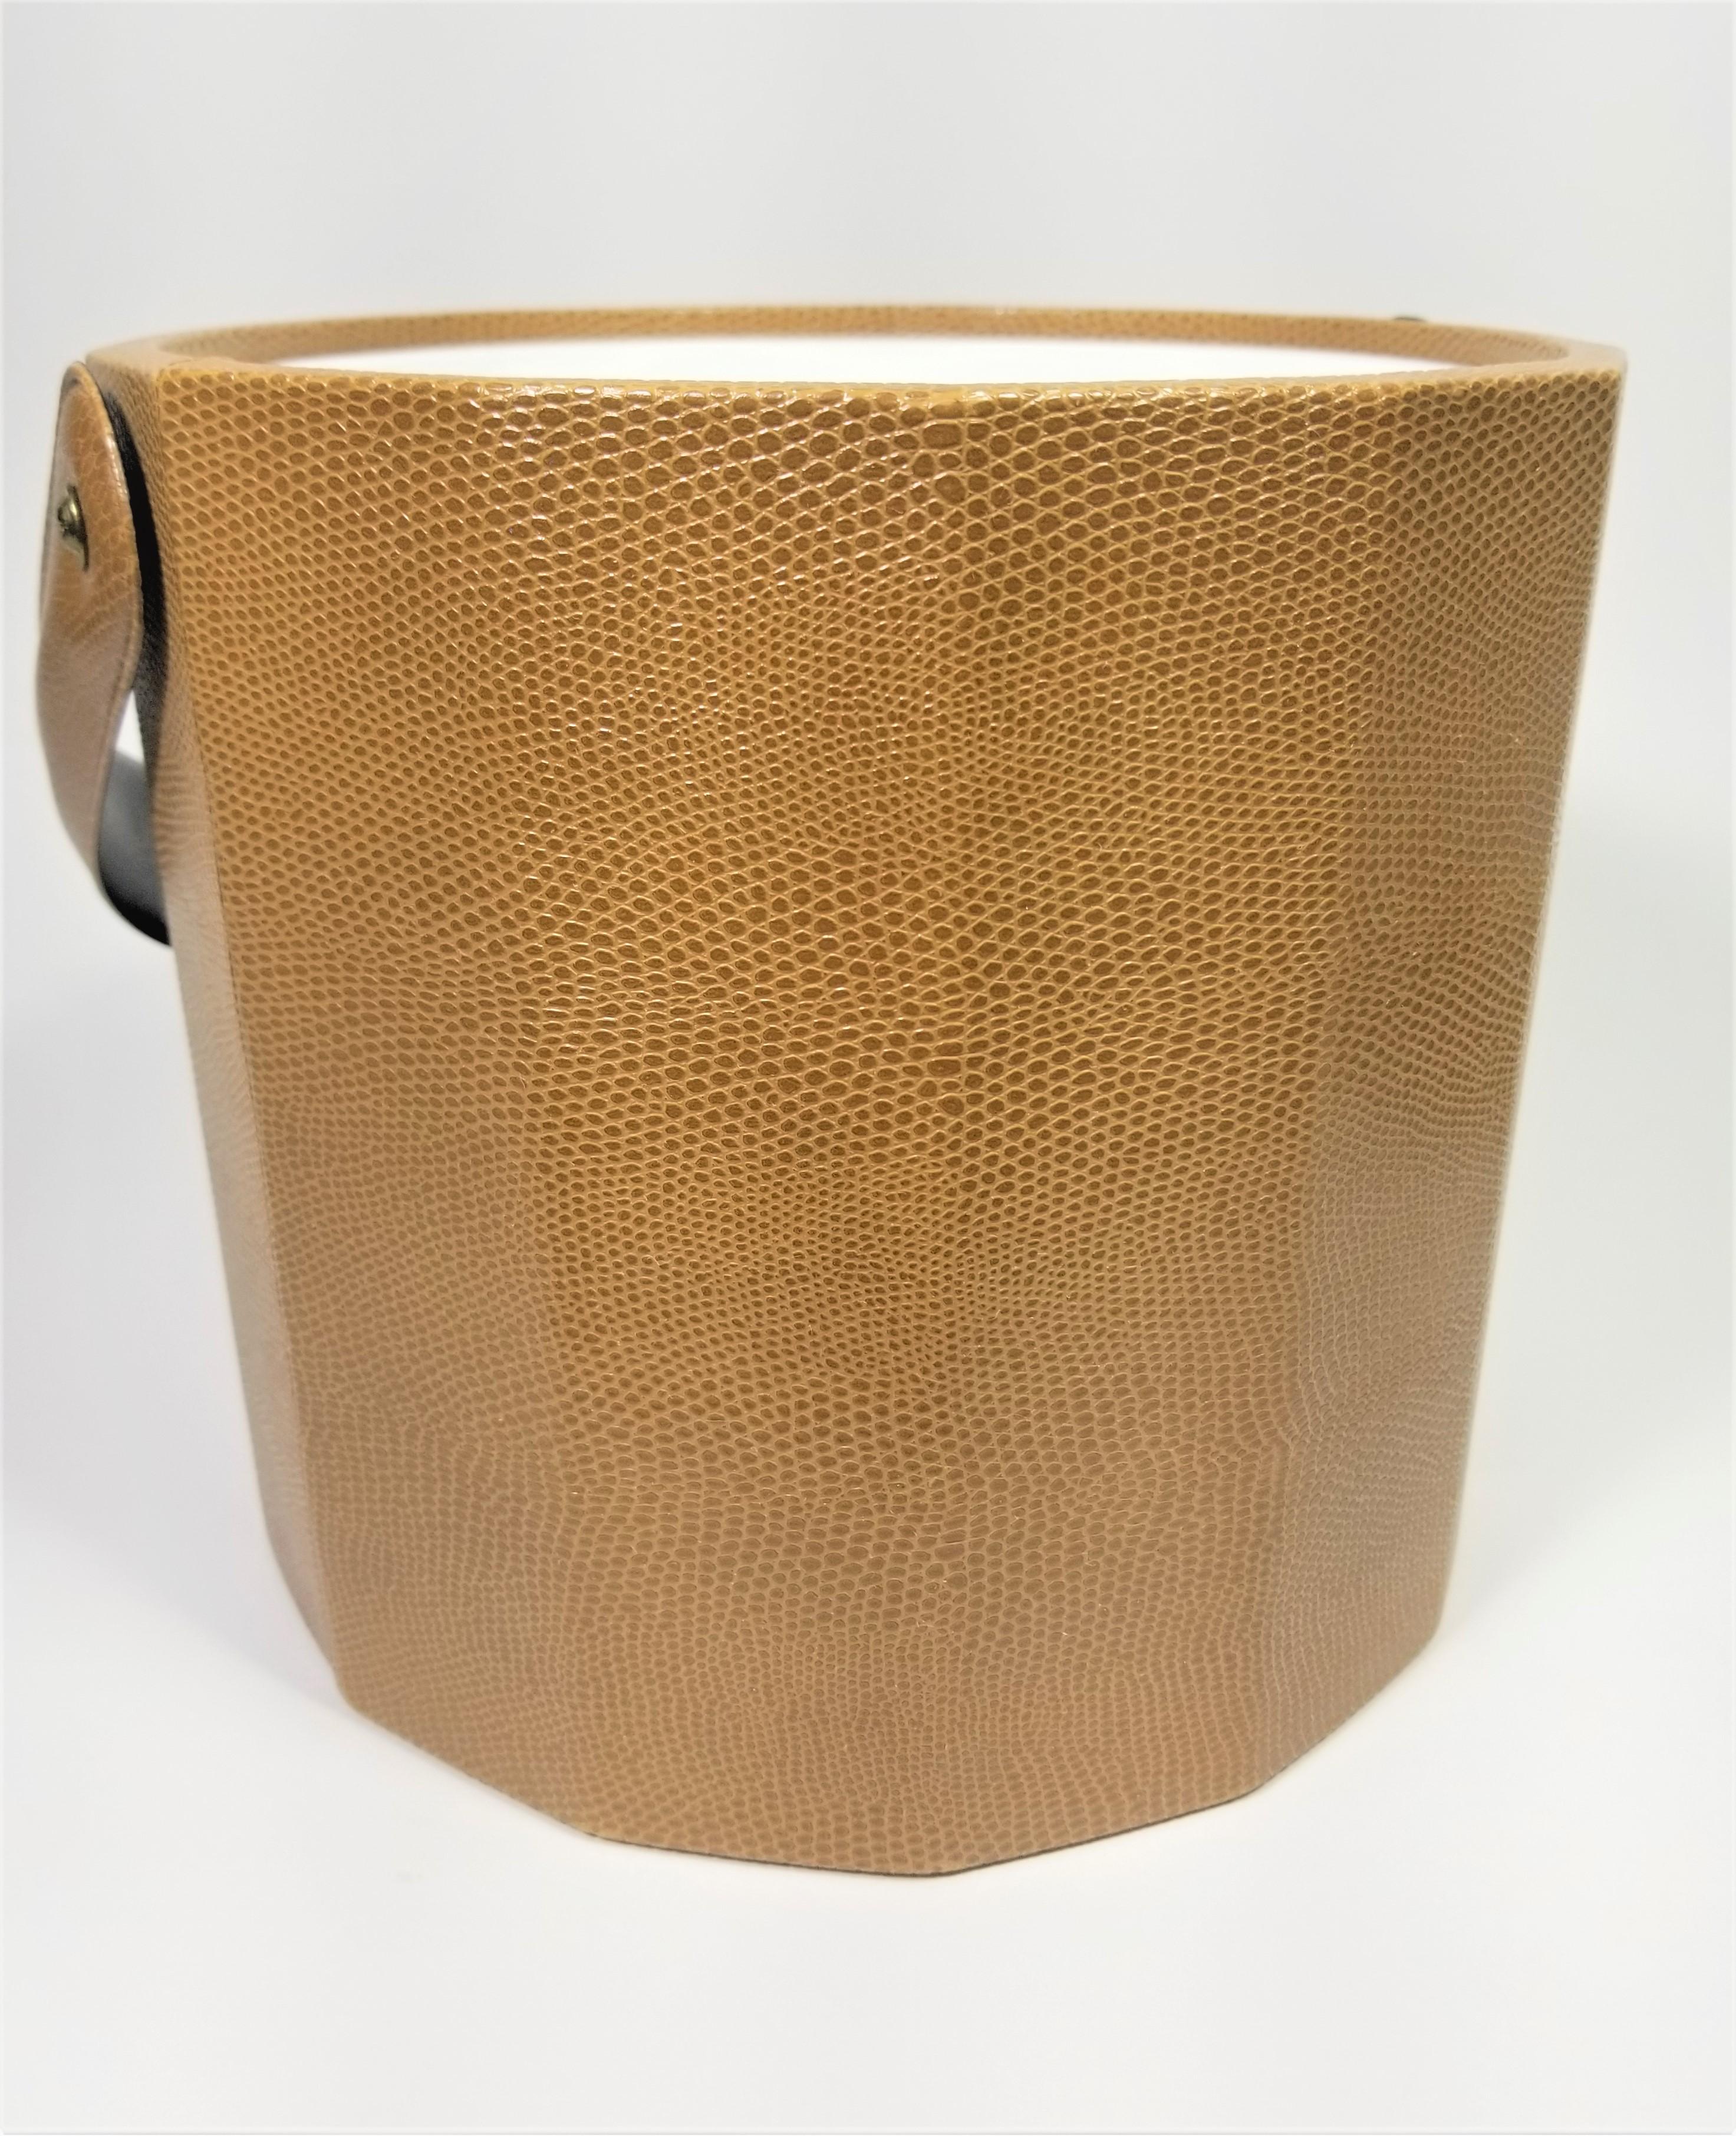 Georges Briard Ice Bucket  Mid Century 1970s  For Sale 1